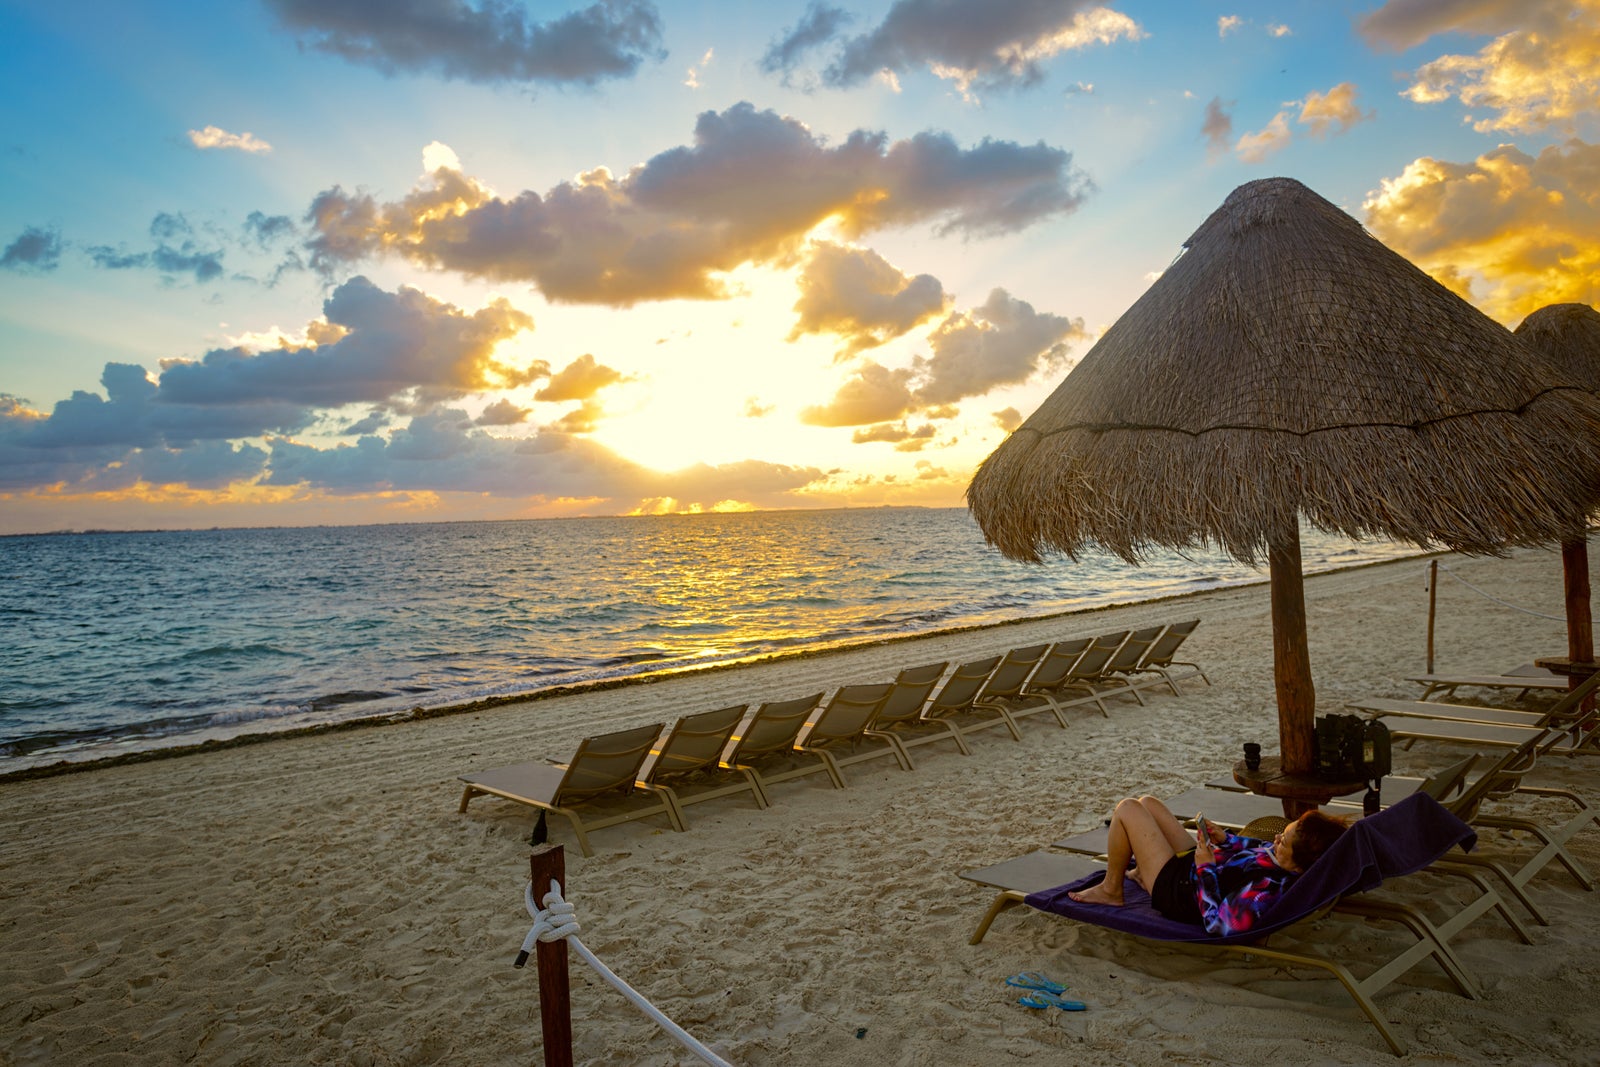 Fly business class to Cancun from multiple US cities for less than $800 on American